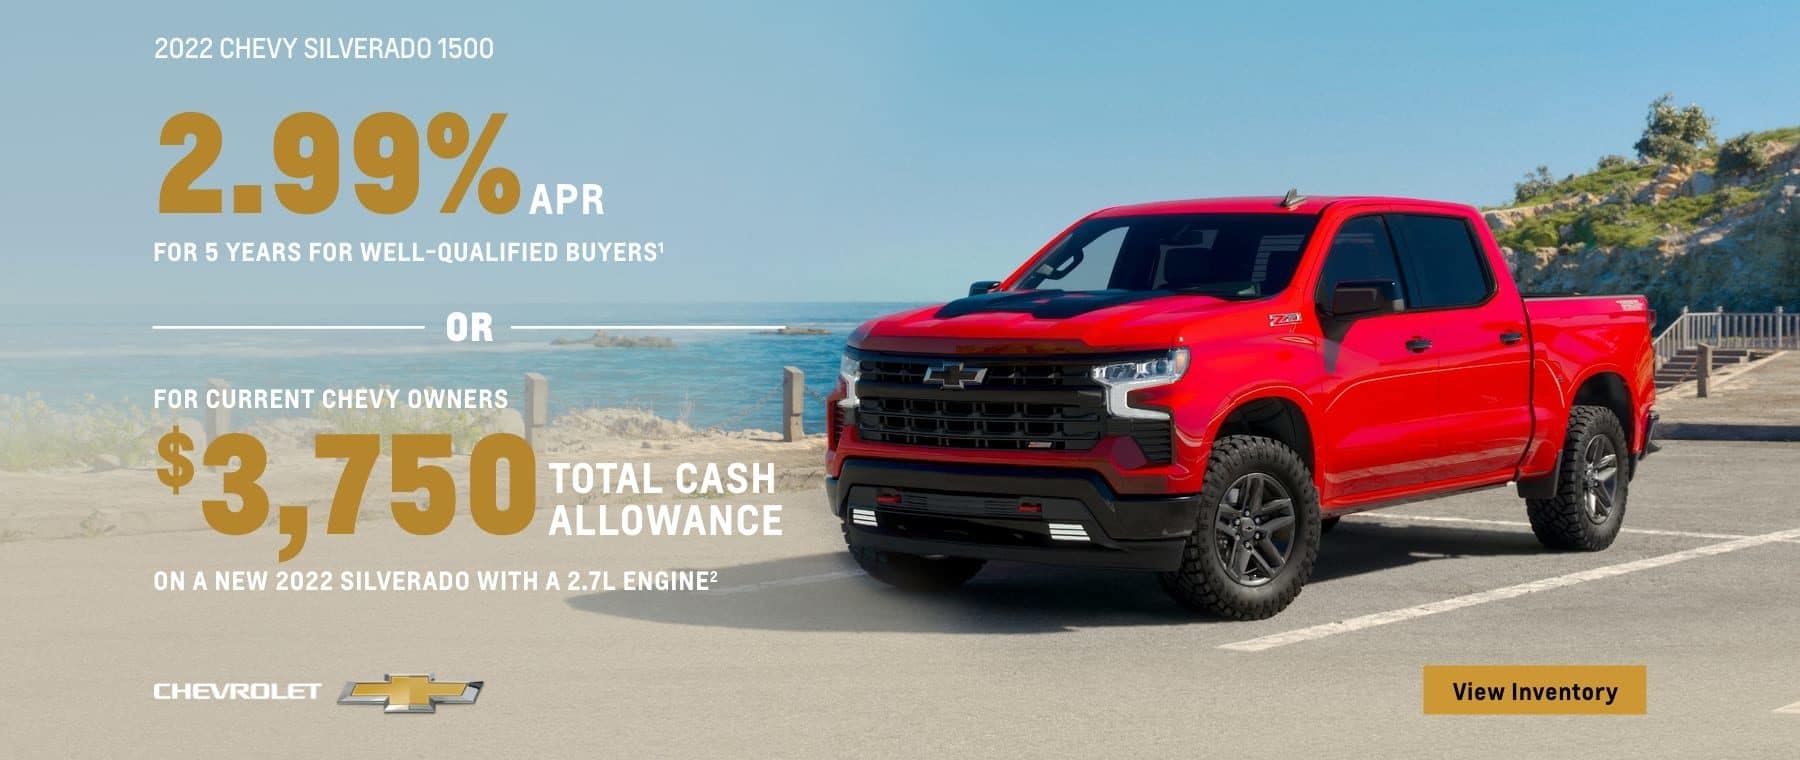 2022 Chevy Silverado 1500. 2.99% APR for 5 years for well-qualified buyers. Or, for current Chevy owners $3,750 total cash allowance on a new 2022 Silverado with a 2.7L engine.